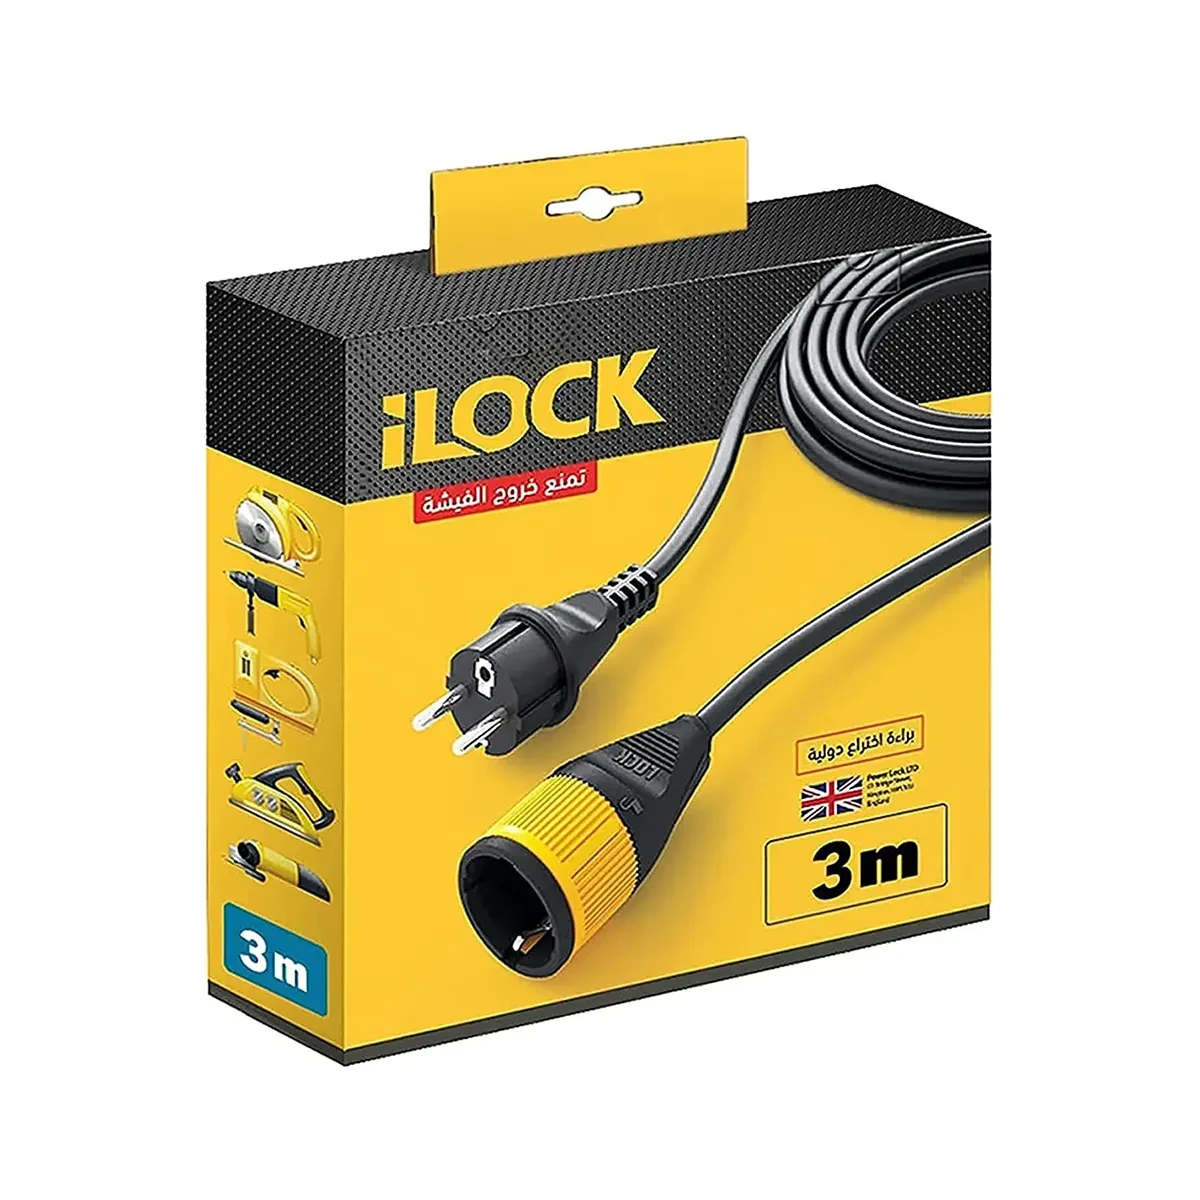 iLock Power Extension Cord Locking Feature 16A (3M)